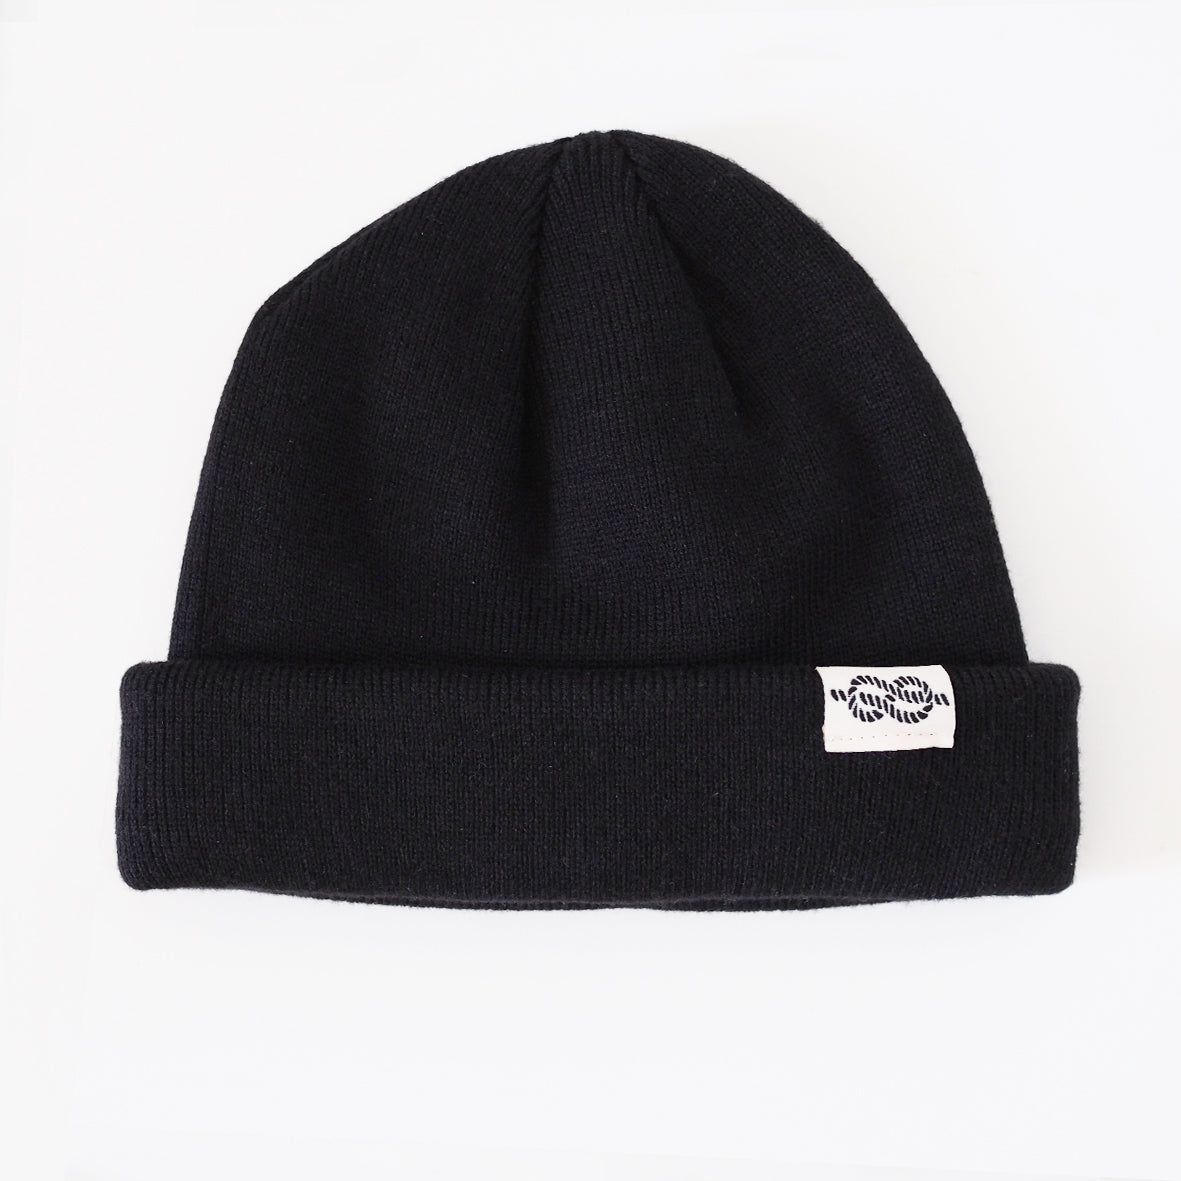 Recycled 8Knot Fisherman Black Beanie